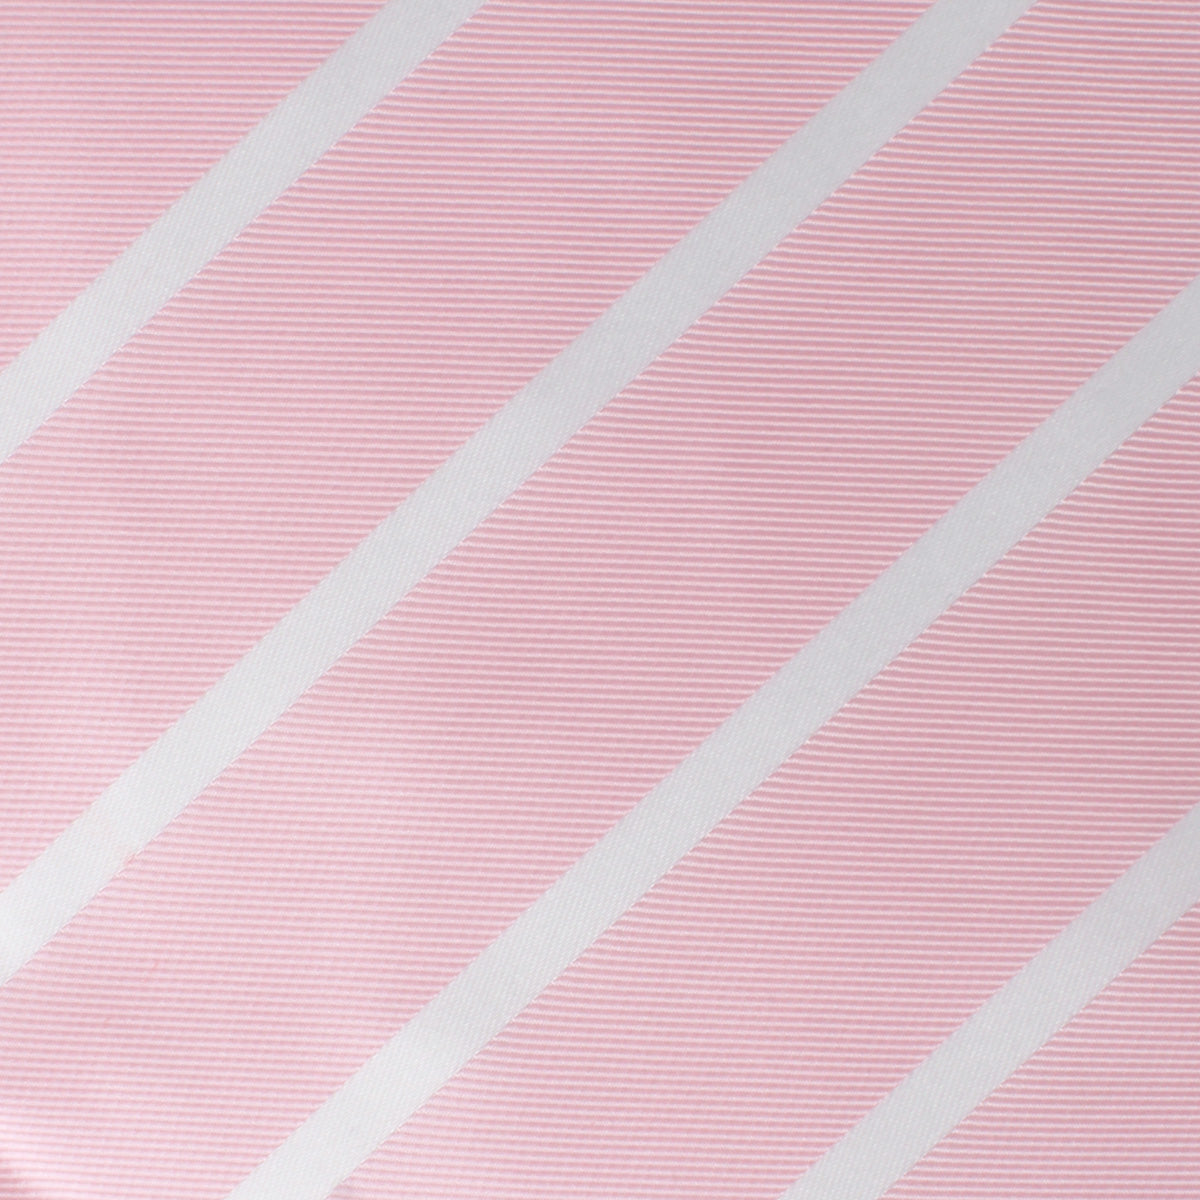 Rose Pink Striped Kids Bow Tie Fabric